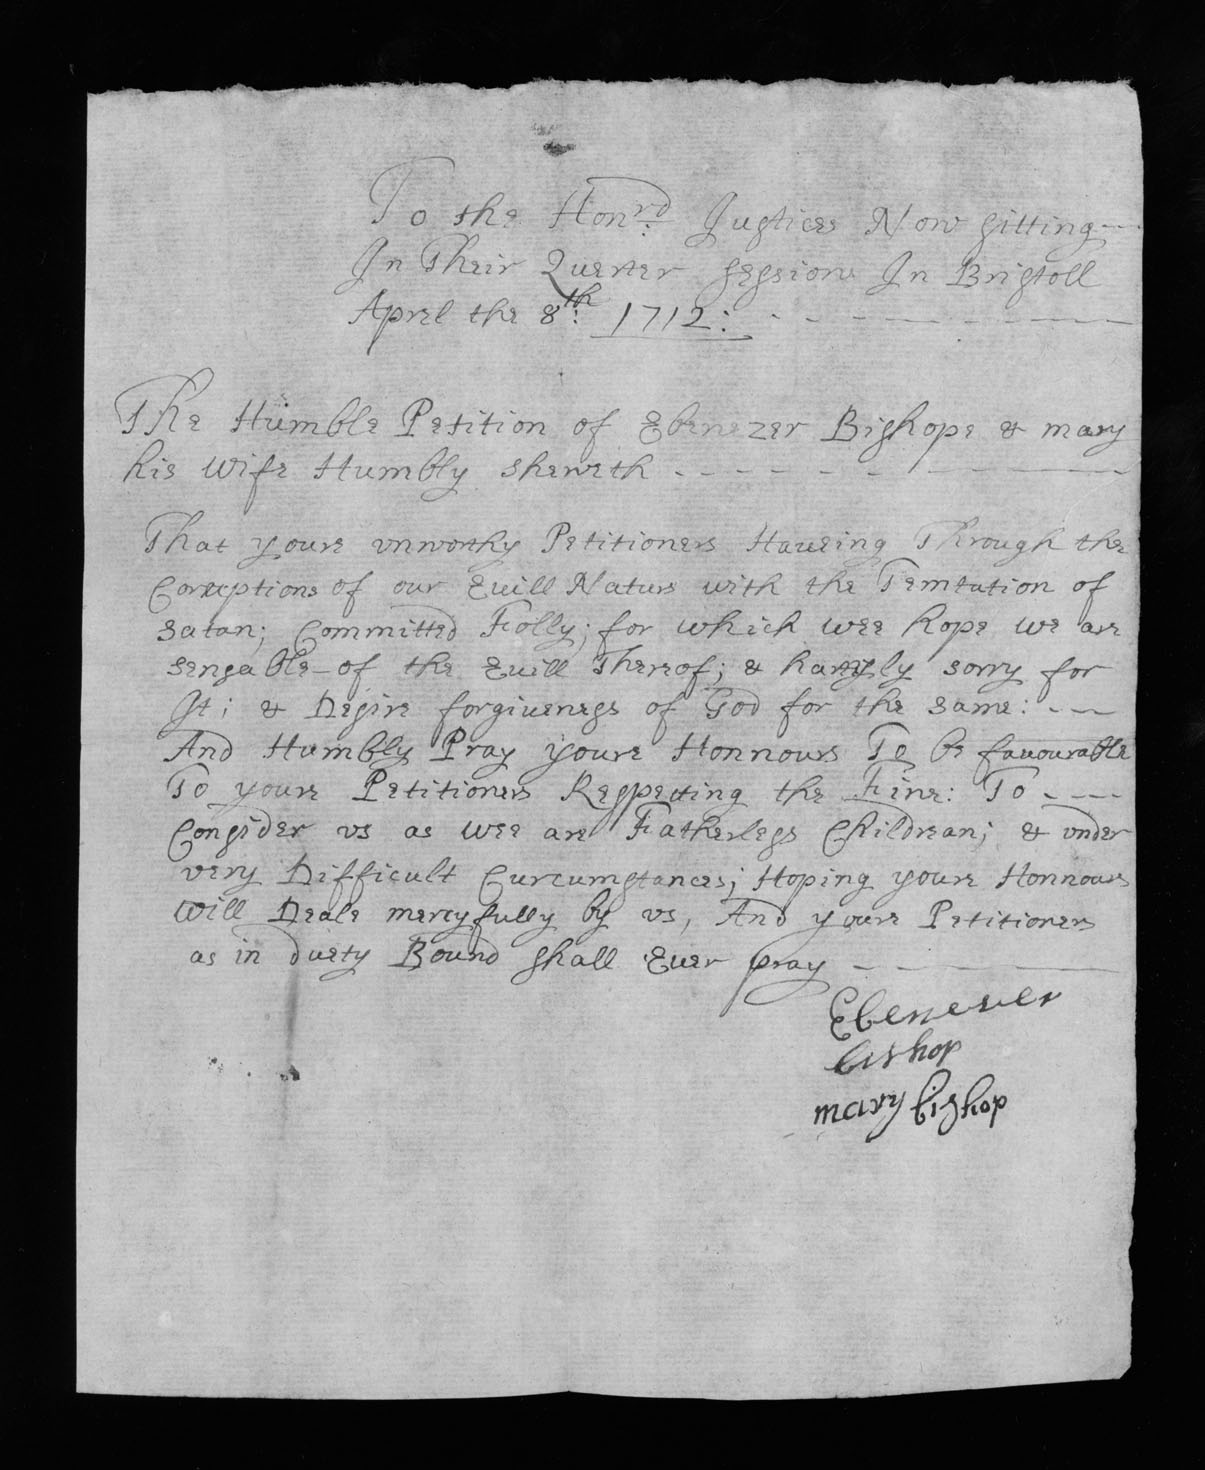 Ebenezer and Mary Bishop, "Ebenezer and Mary Bishop petition," Recto